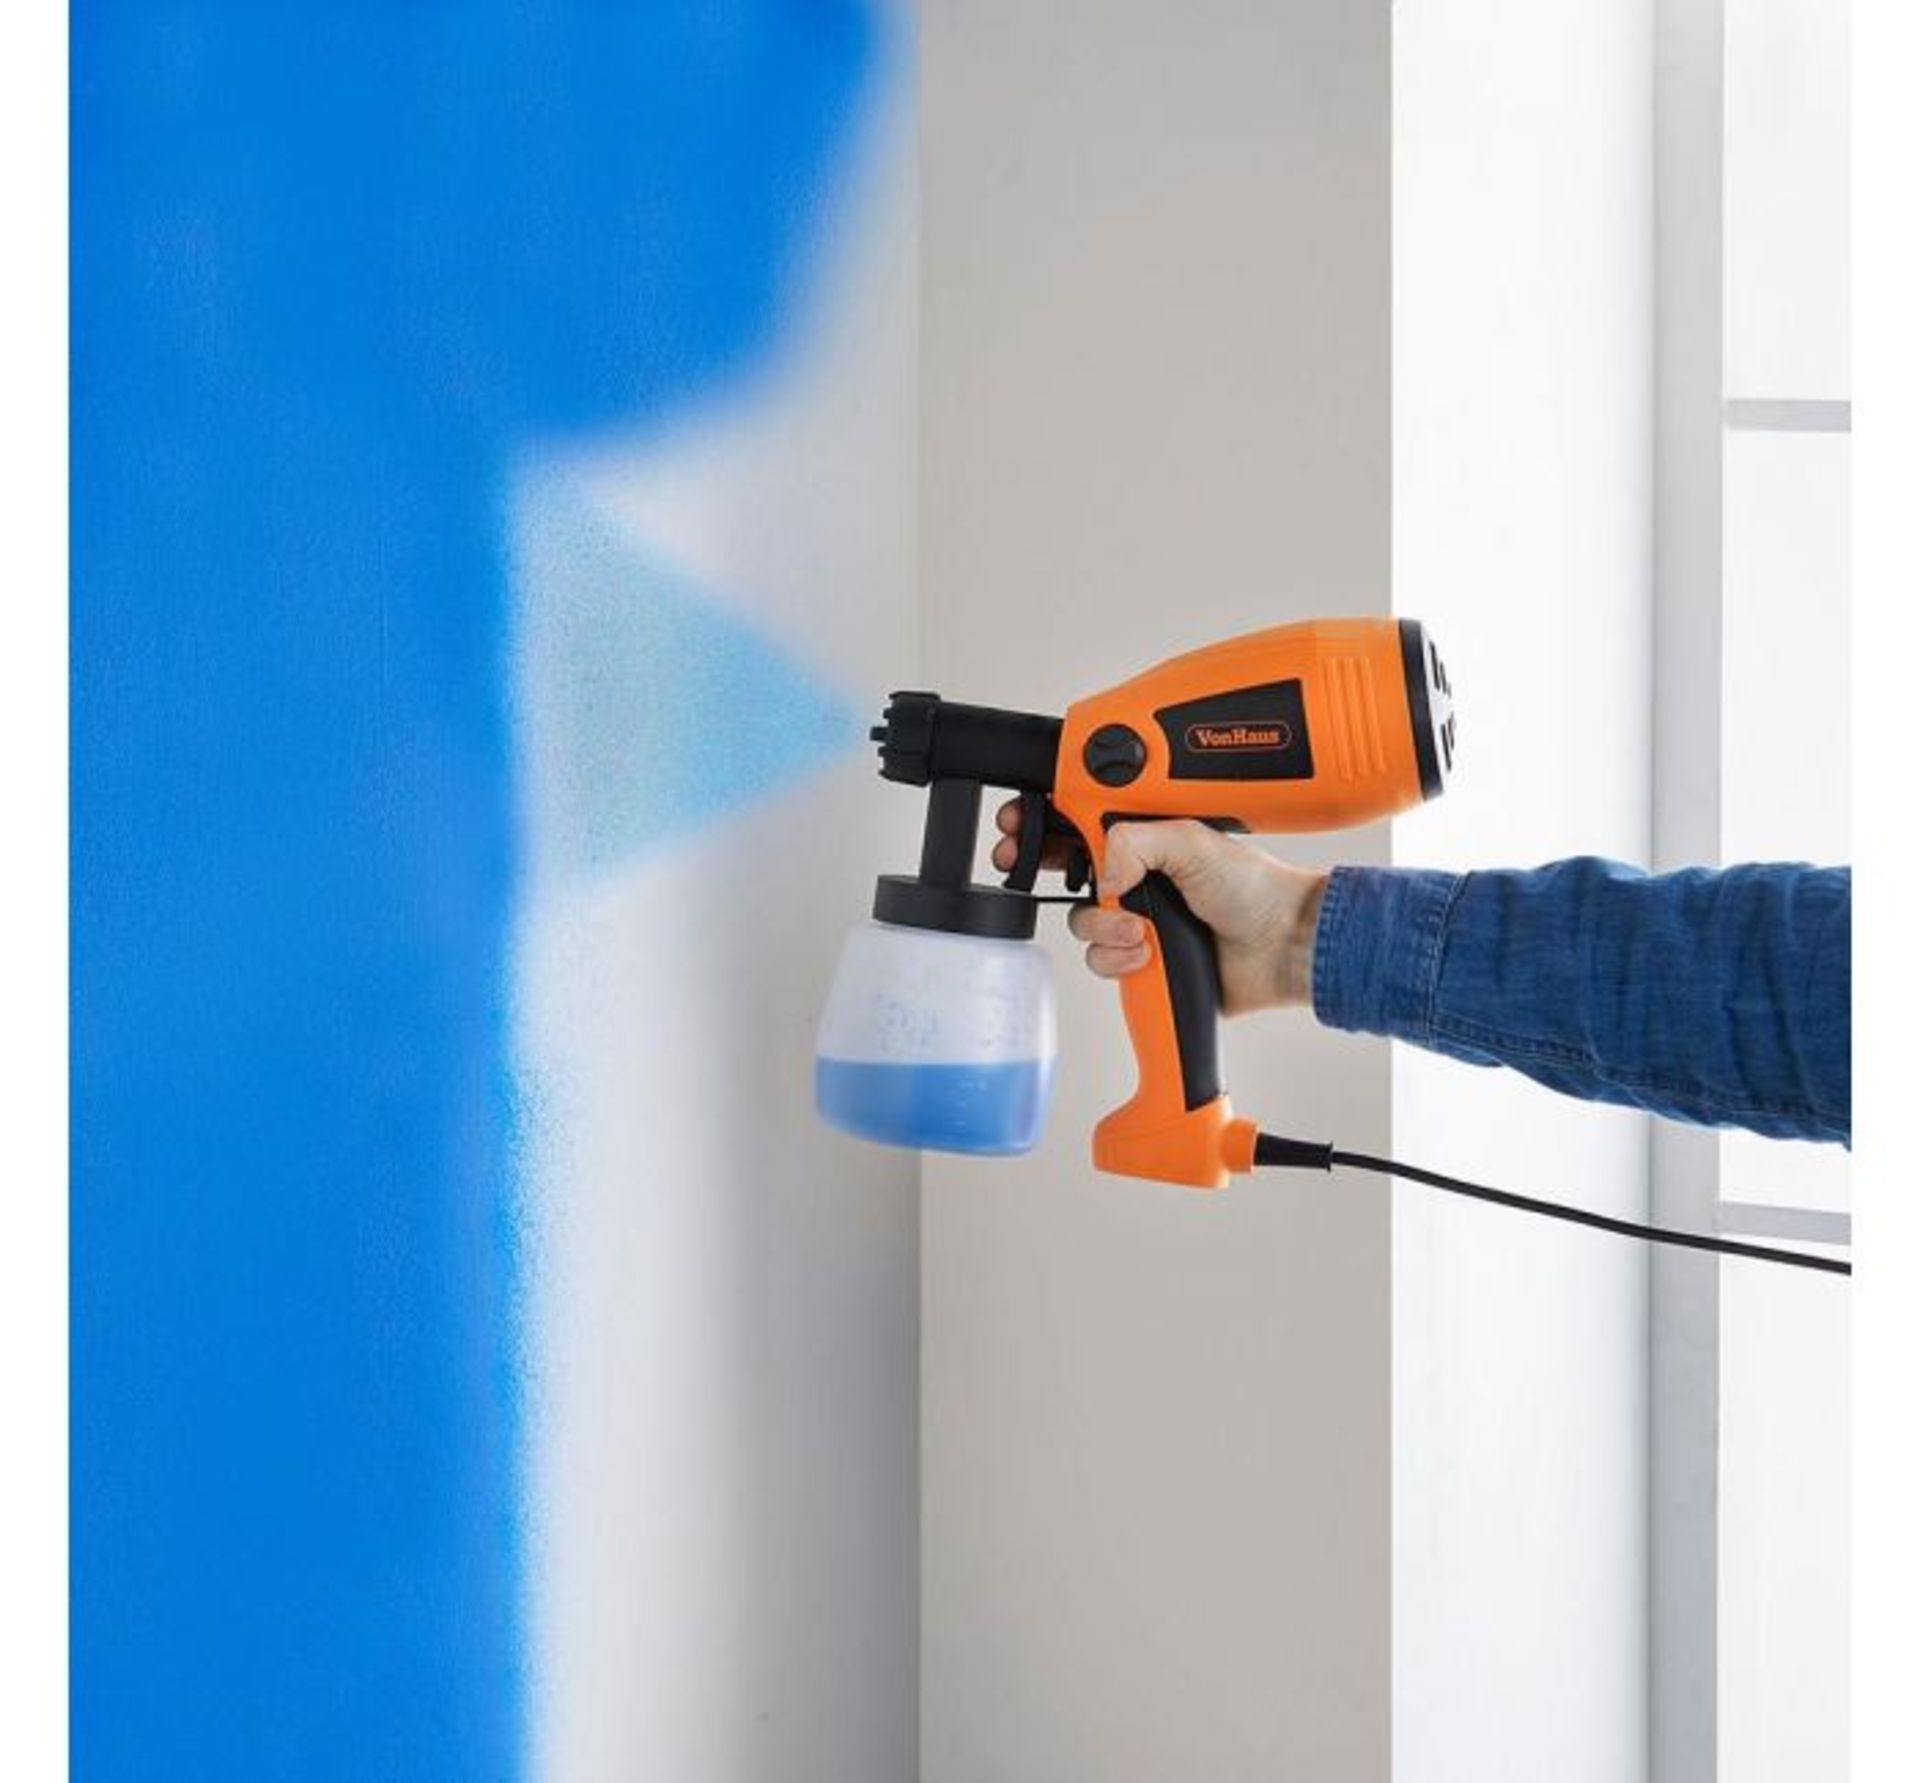 (DD36) 400W Spray Gun Use this effective paint sprayer to apply paints, oils, varnishes, stain... - Image 2 of 2